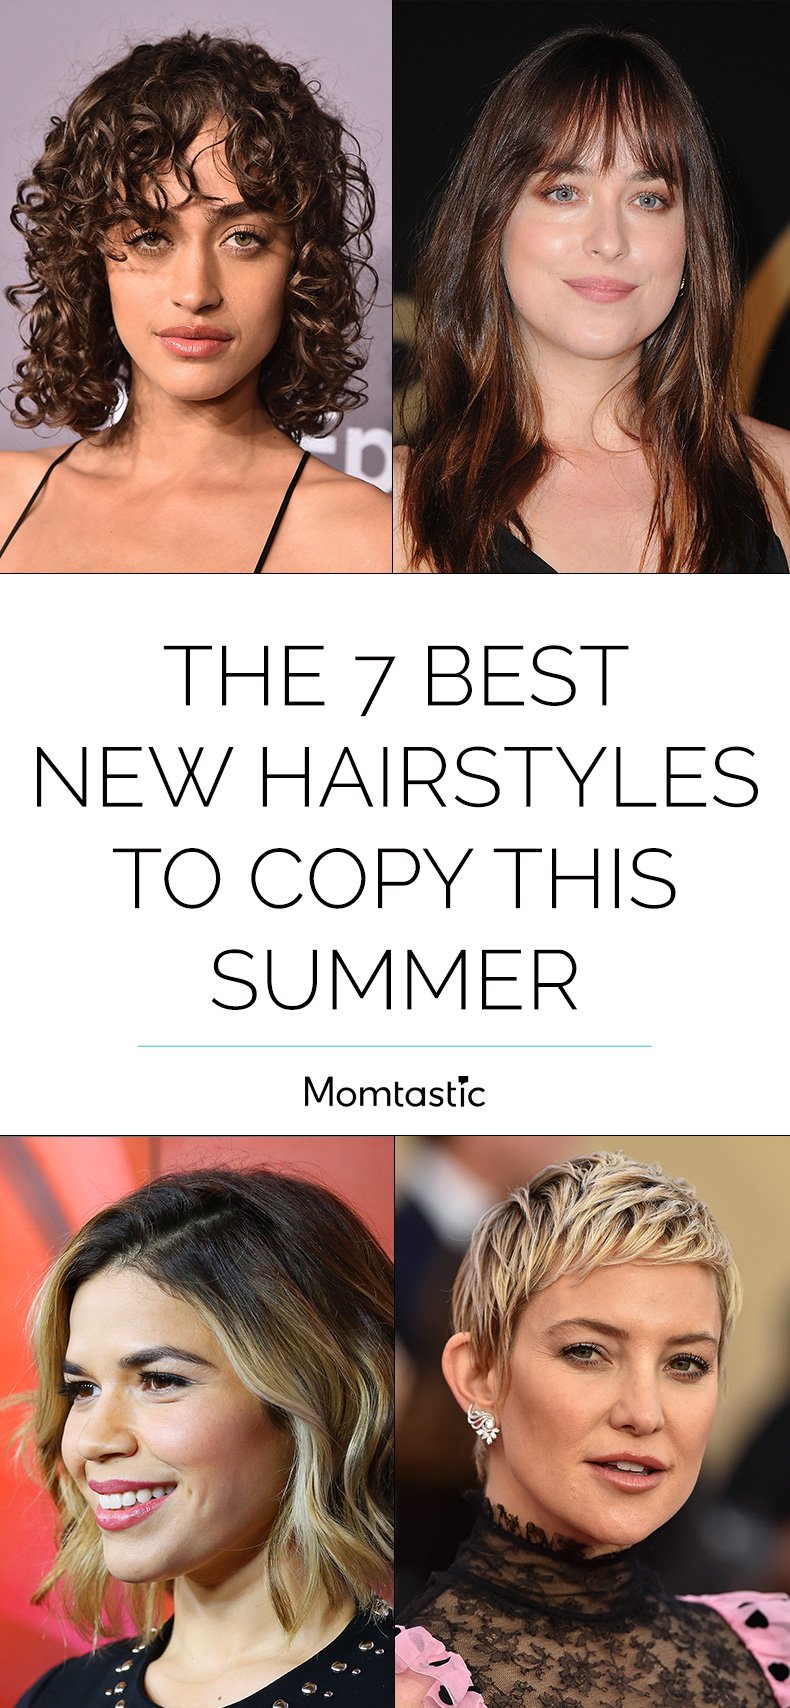 The 7 Best New Hairstyles to Copy This Summer